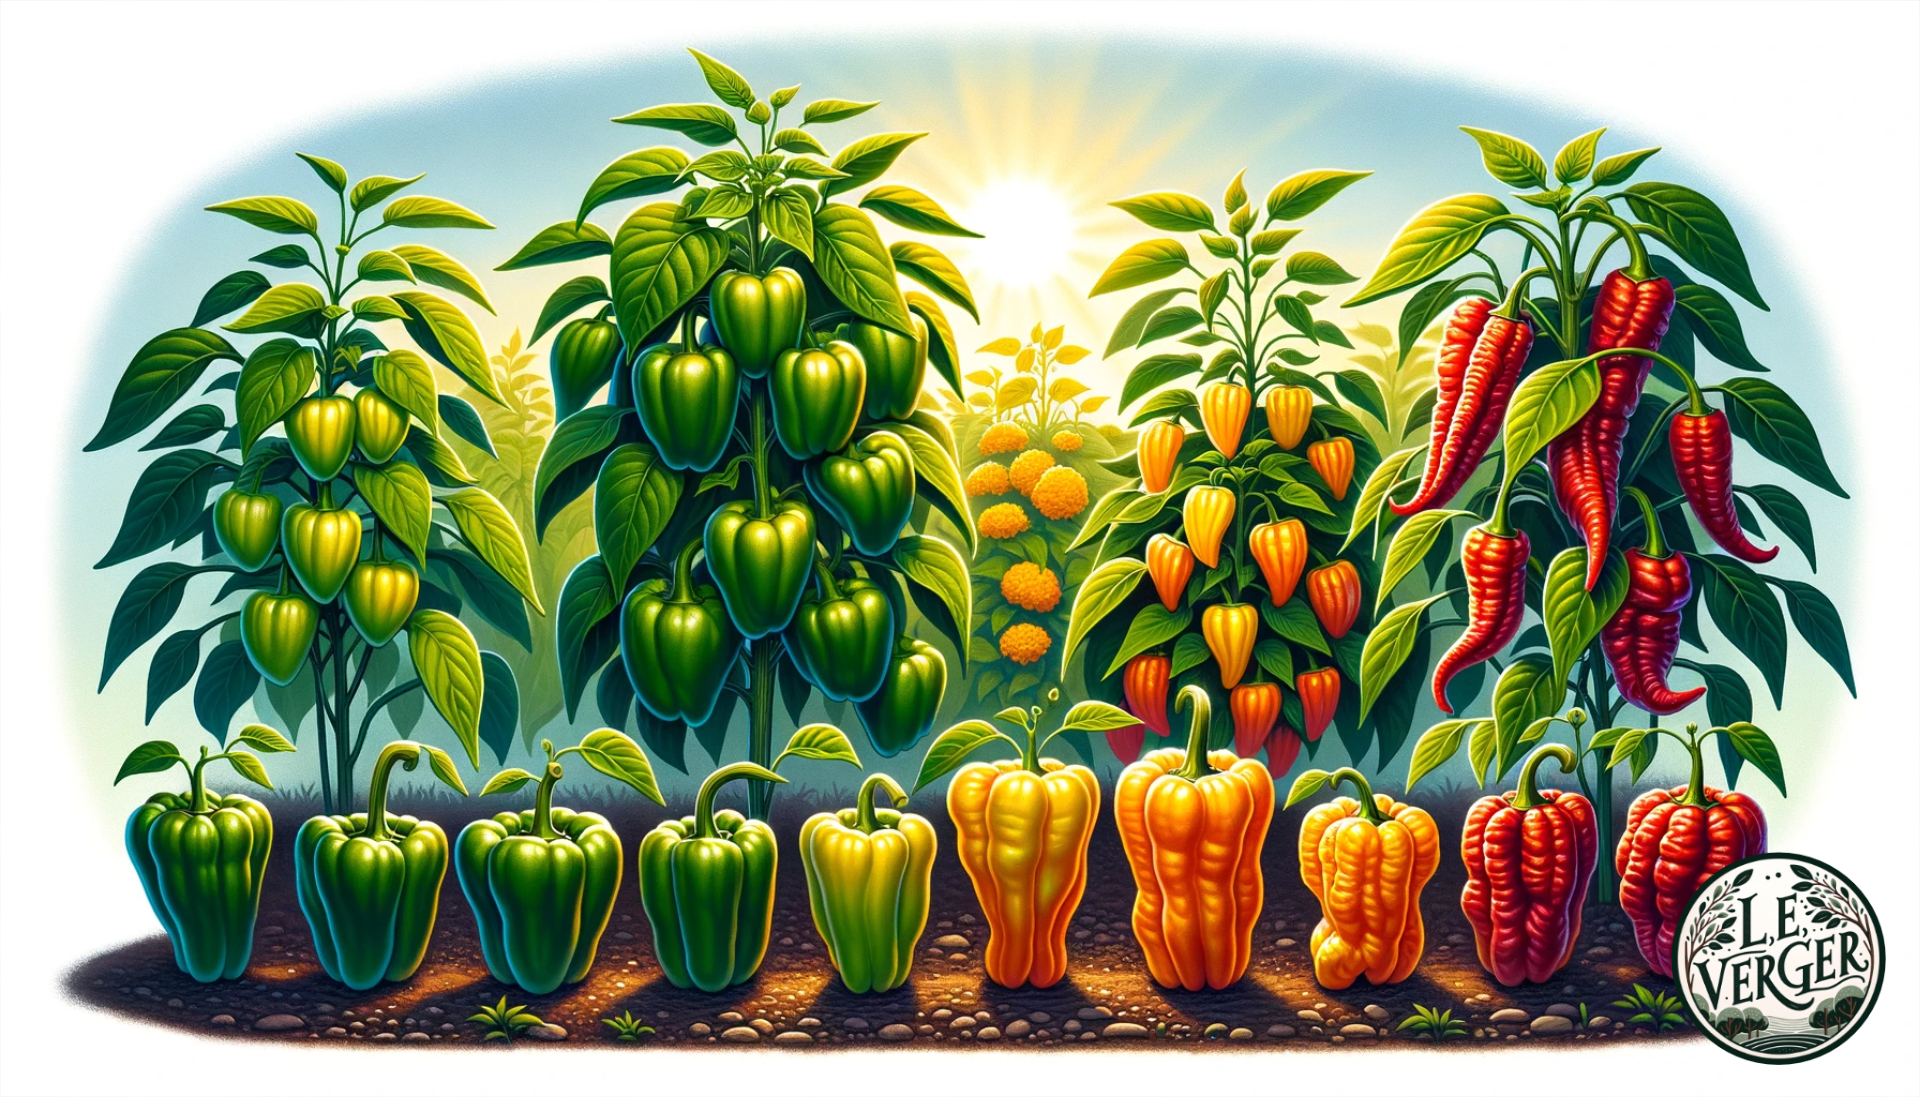 Wide illustration of a vibrant garden patch with a range of pepper plants in various stages of growth. On the left, a large mild bell pepper plant with bright green leaves and shiny, plump green peppers hanging beneath. In the centre, various medium-sized pepper plants showing a spectrum of colours from yellow to orange to red. On the right, a Carolina Reaper plant with deep red, wrinkled peppers, and a small flame indicating its fiery nature.